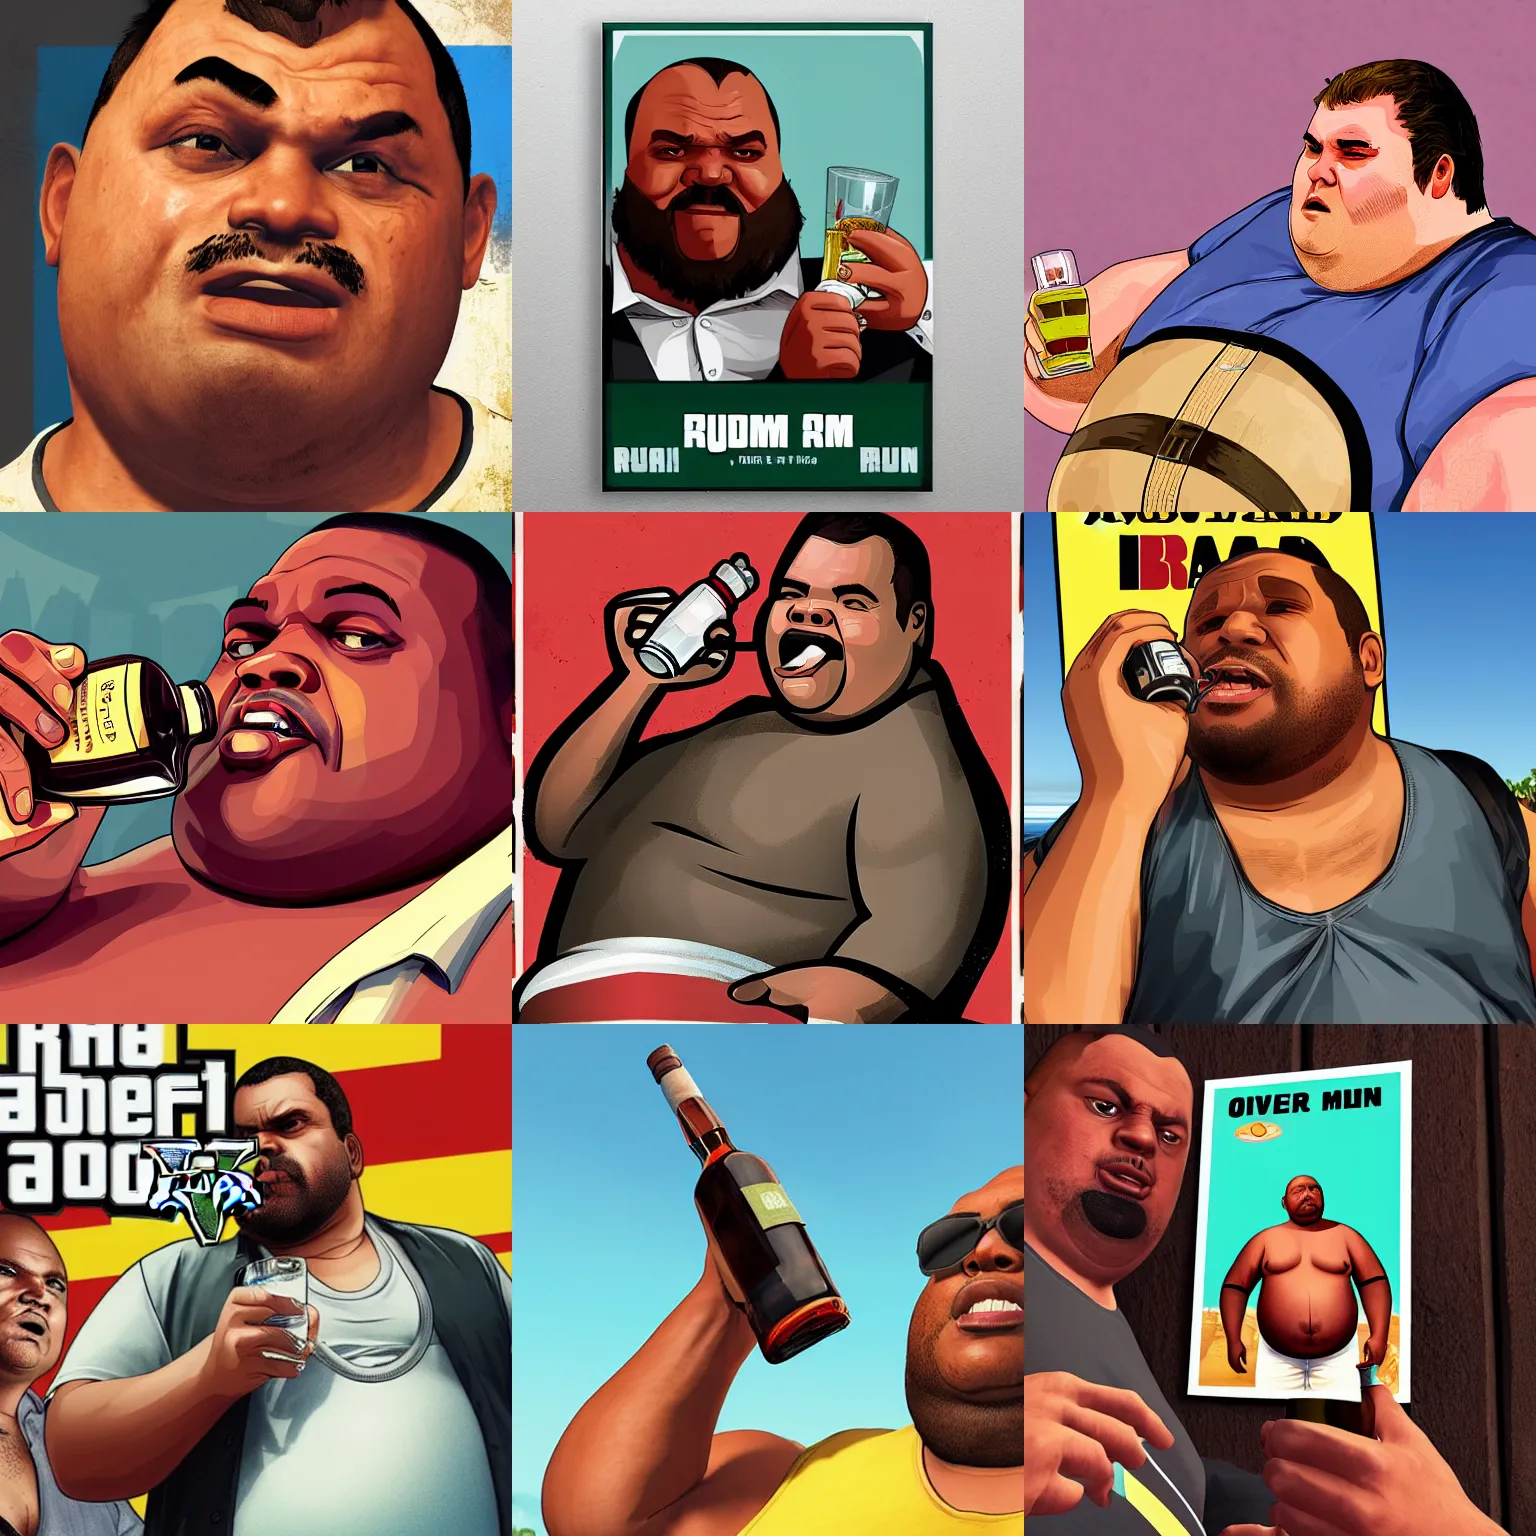 Prompt: Overweight man drinking rum, closeup, GTA V poster